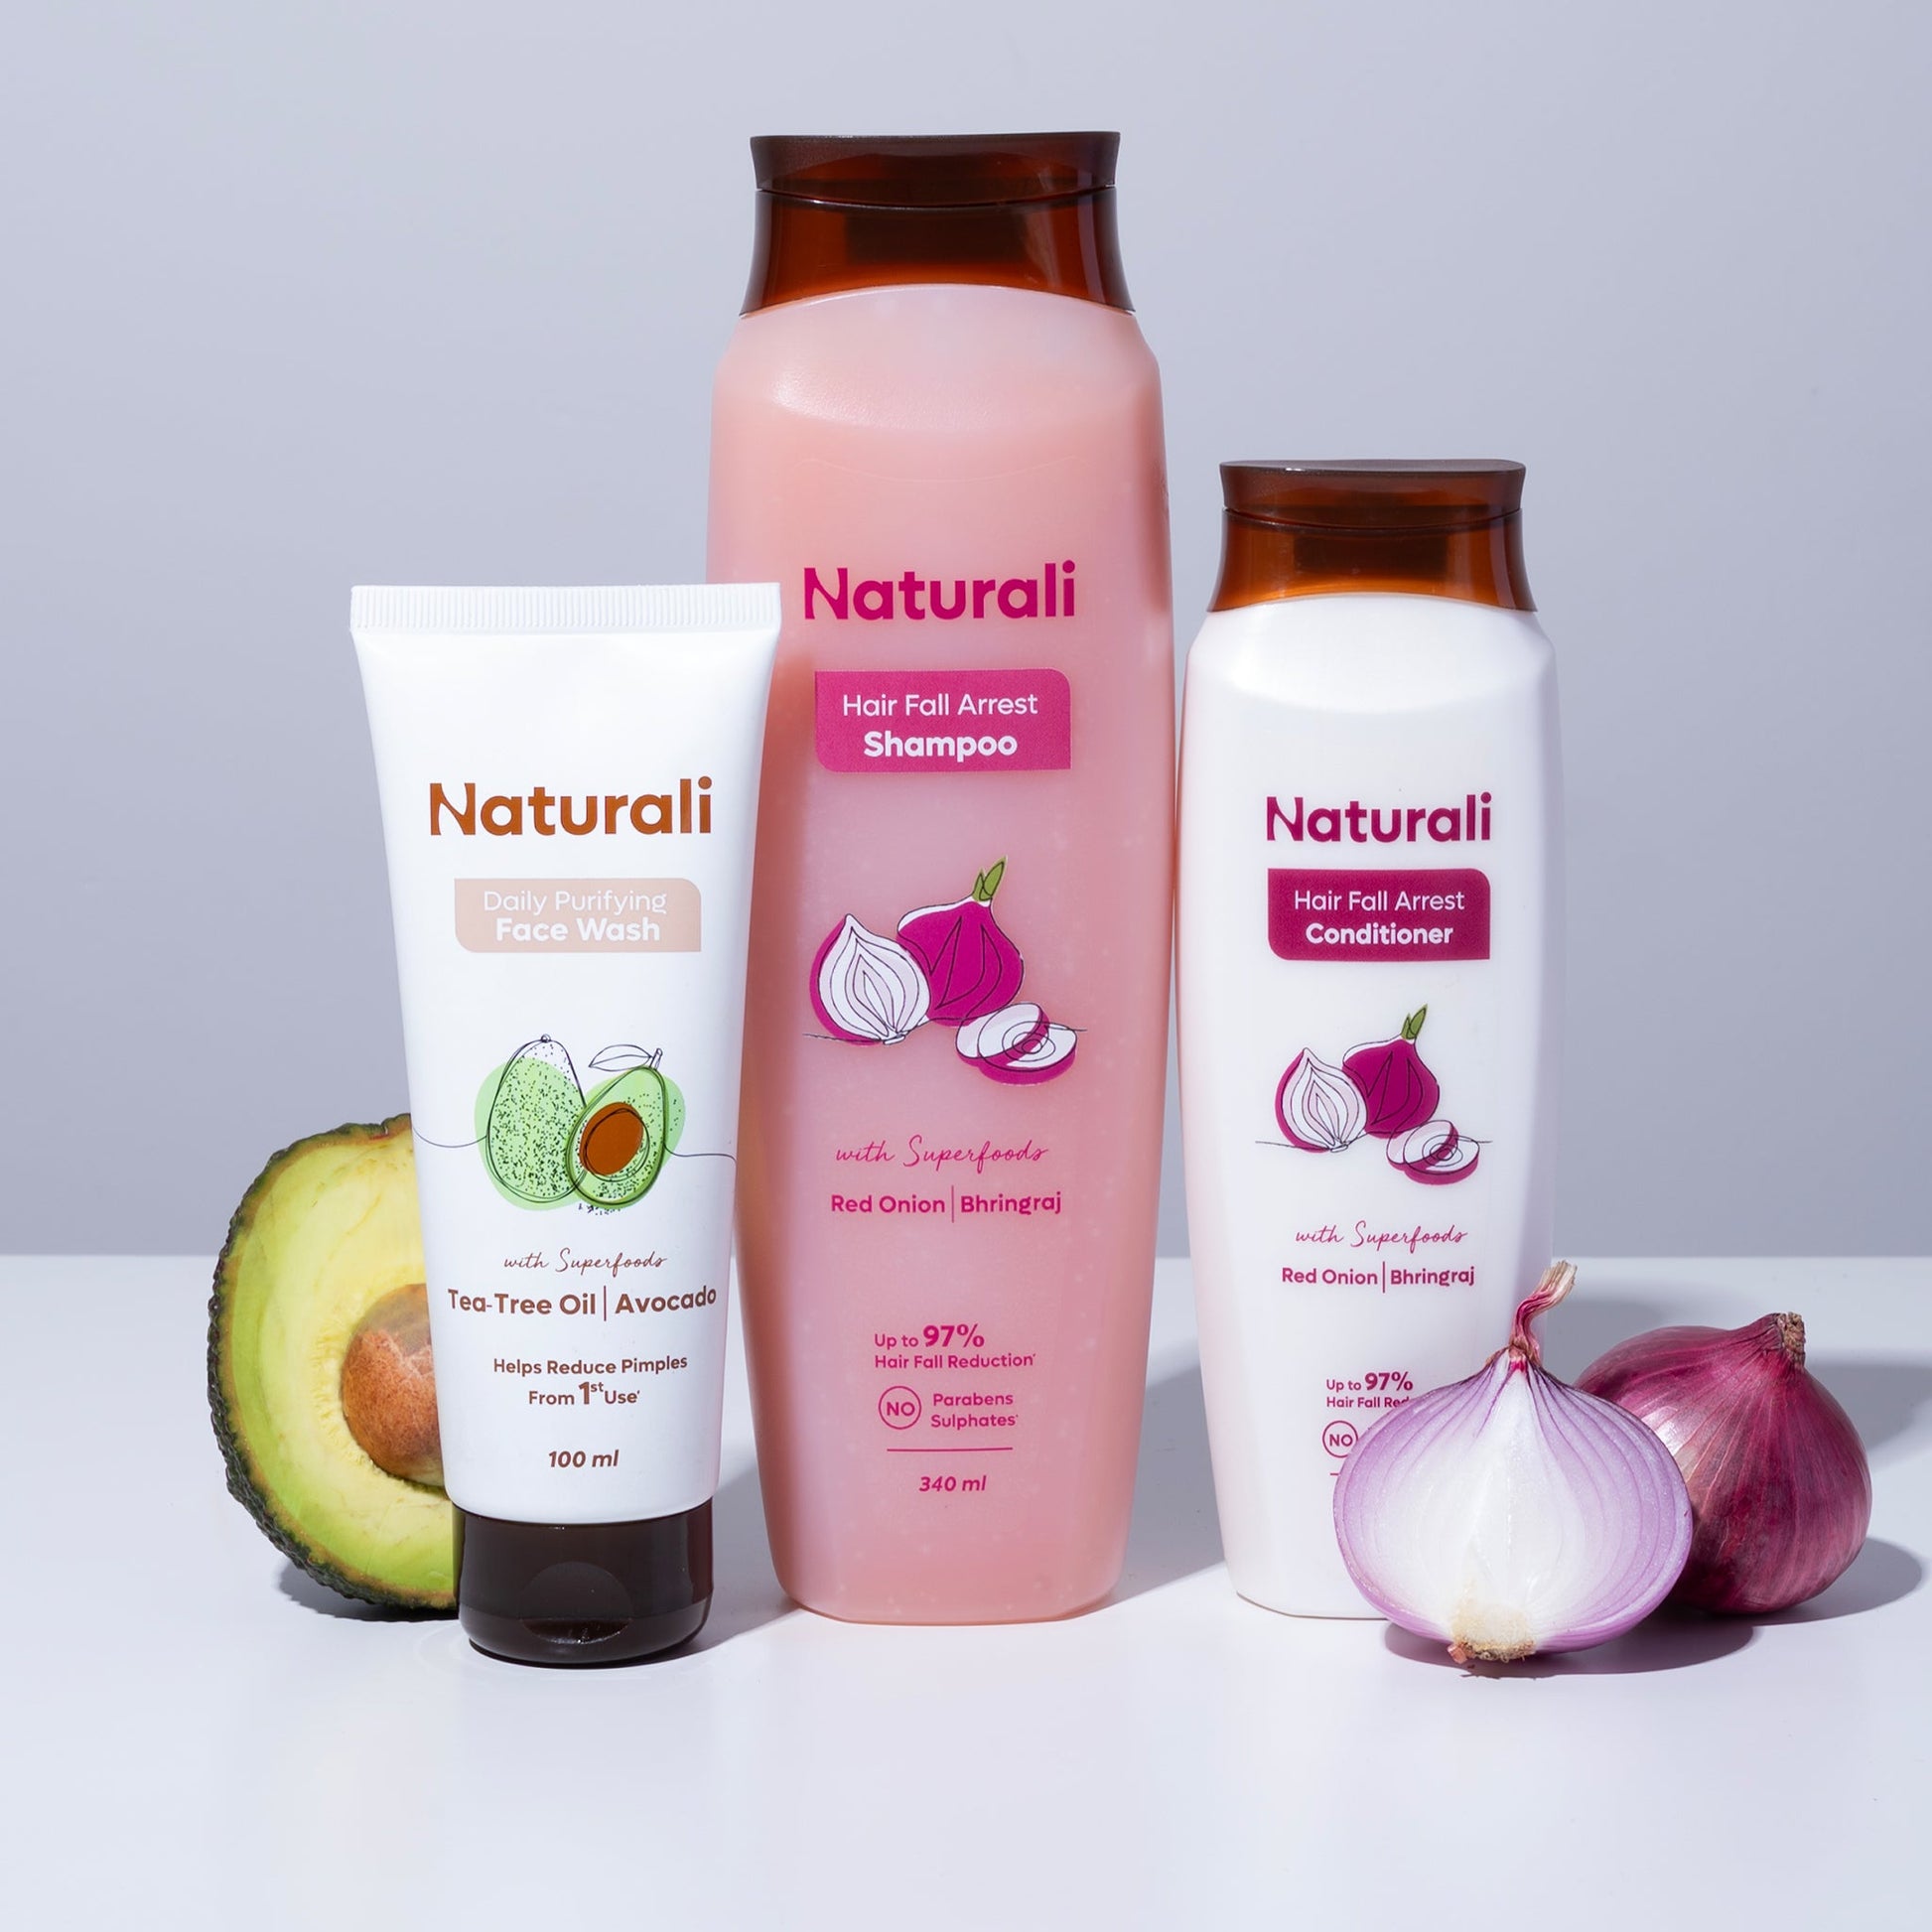 Naturali Hair Fall Arrest Shampoo + Hair Fall Arrest Conditioner + Daily Purifying Face Wash